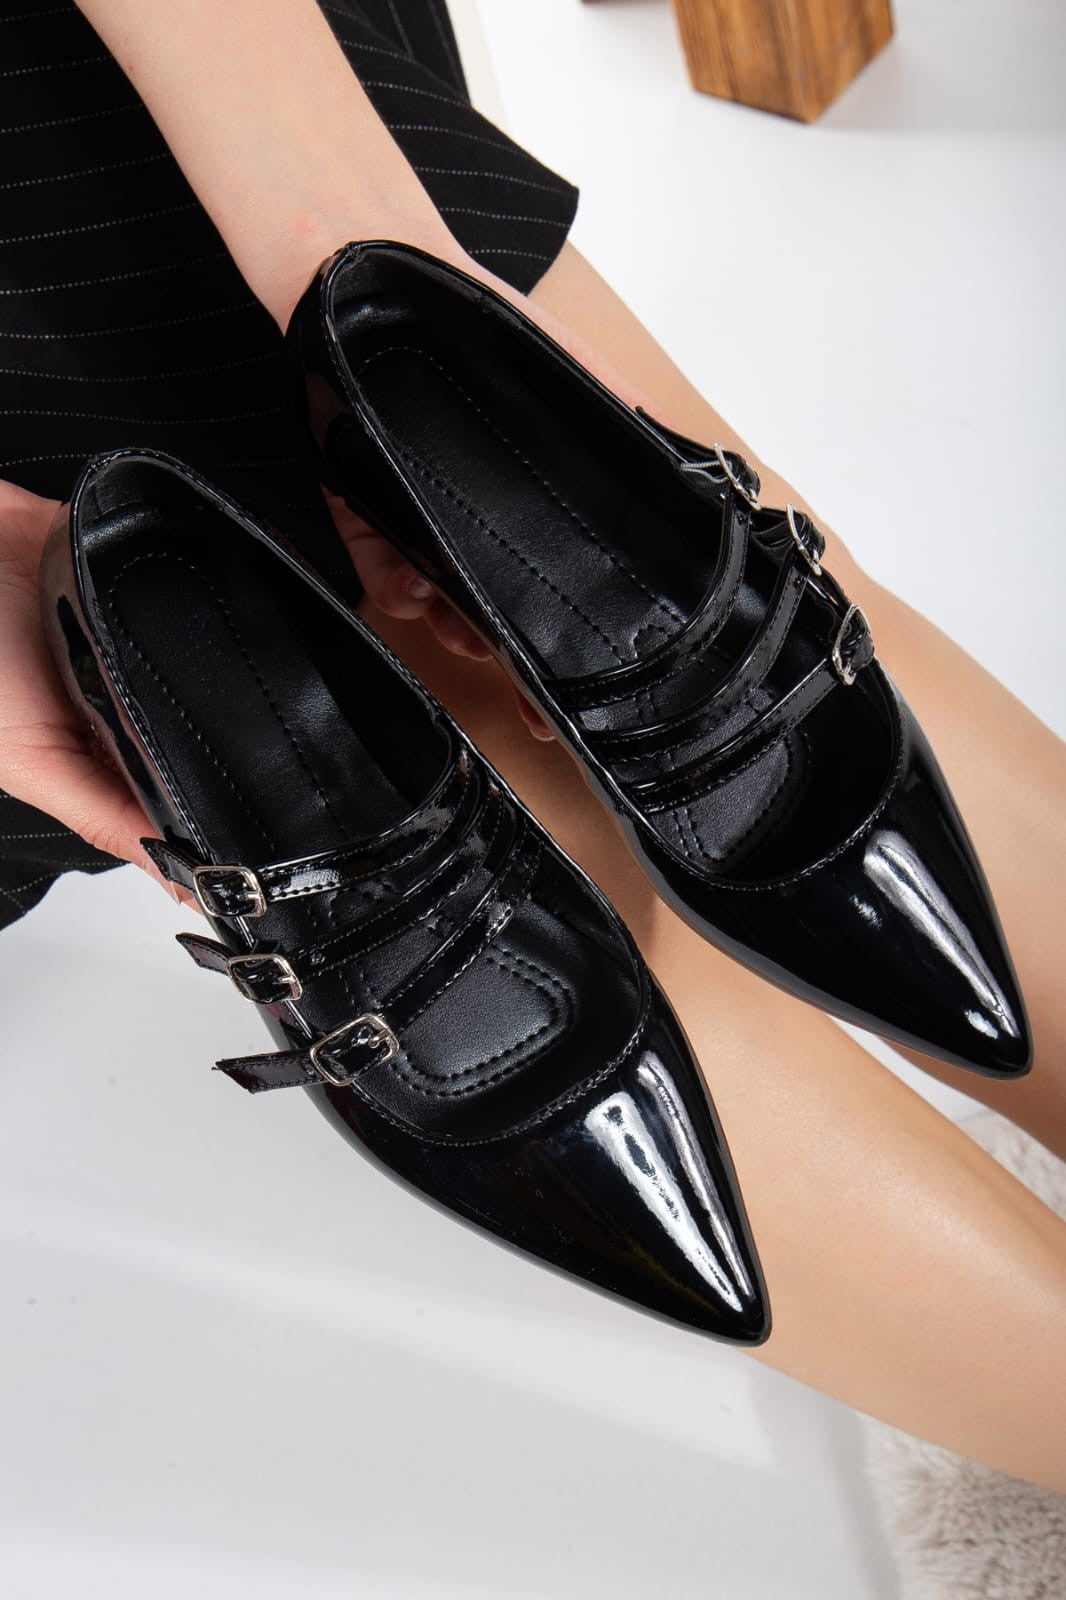 Women's Hoppe Black Patent Leather Ballerina Shoes - STREETMODE ™